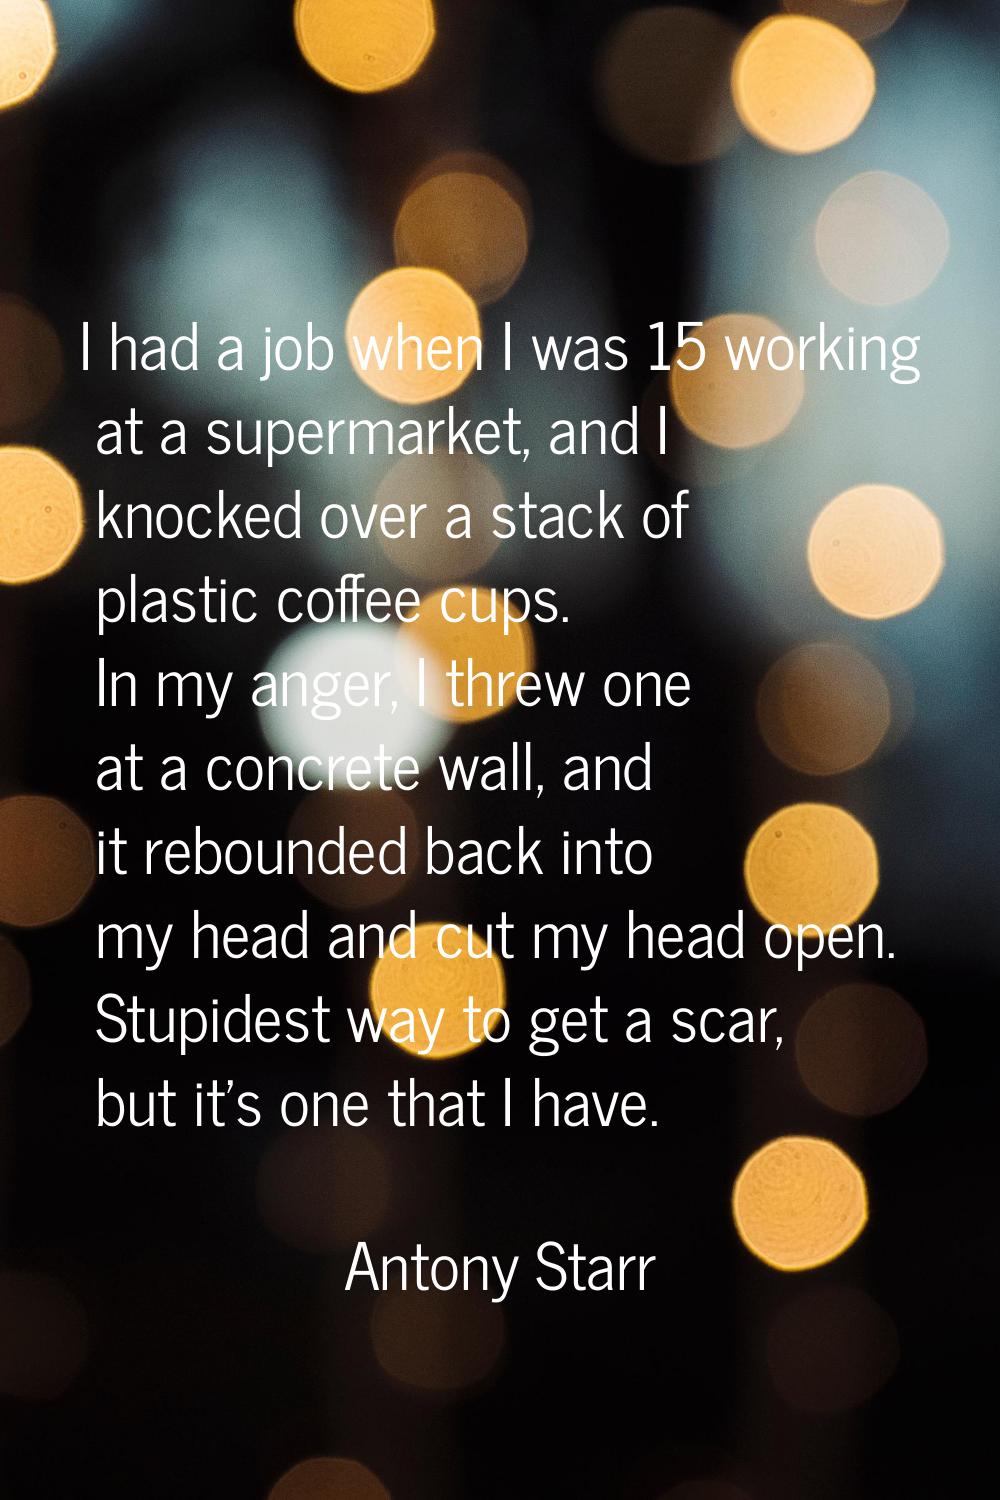 I had a job when I was 15 working at a supermarket, and I knocked over a stack of plastic coffee cu